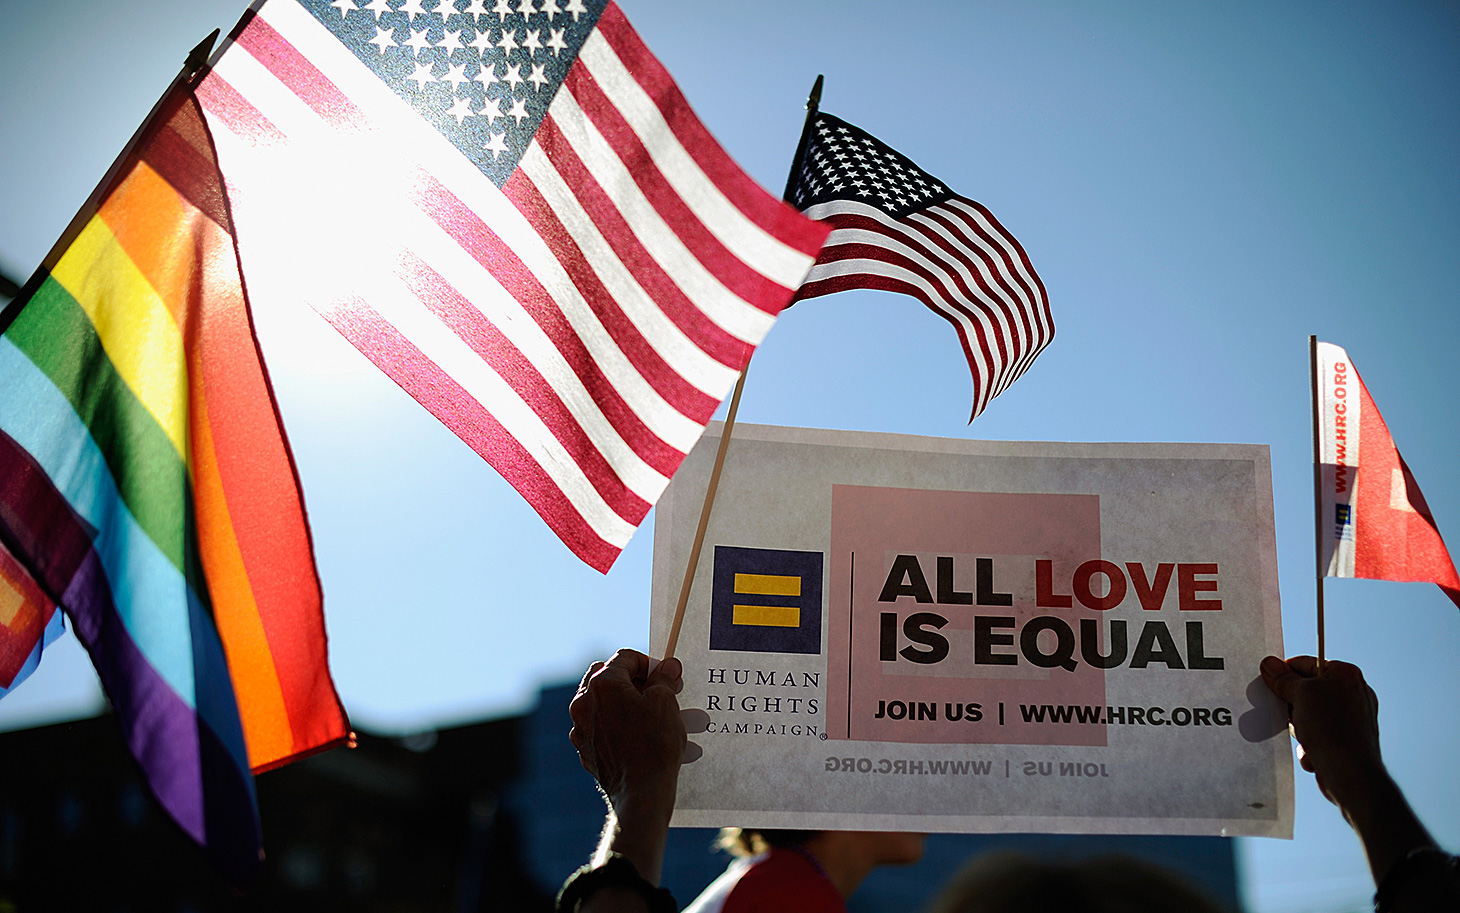 Californians React To Supreme Court Rulings On Prop 8 And DOMA